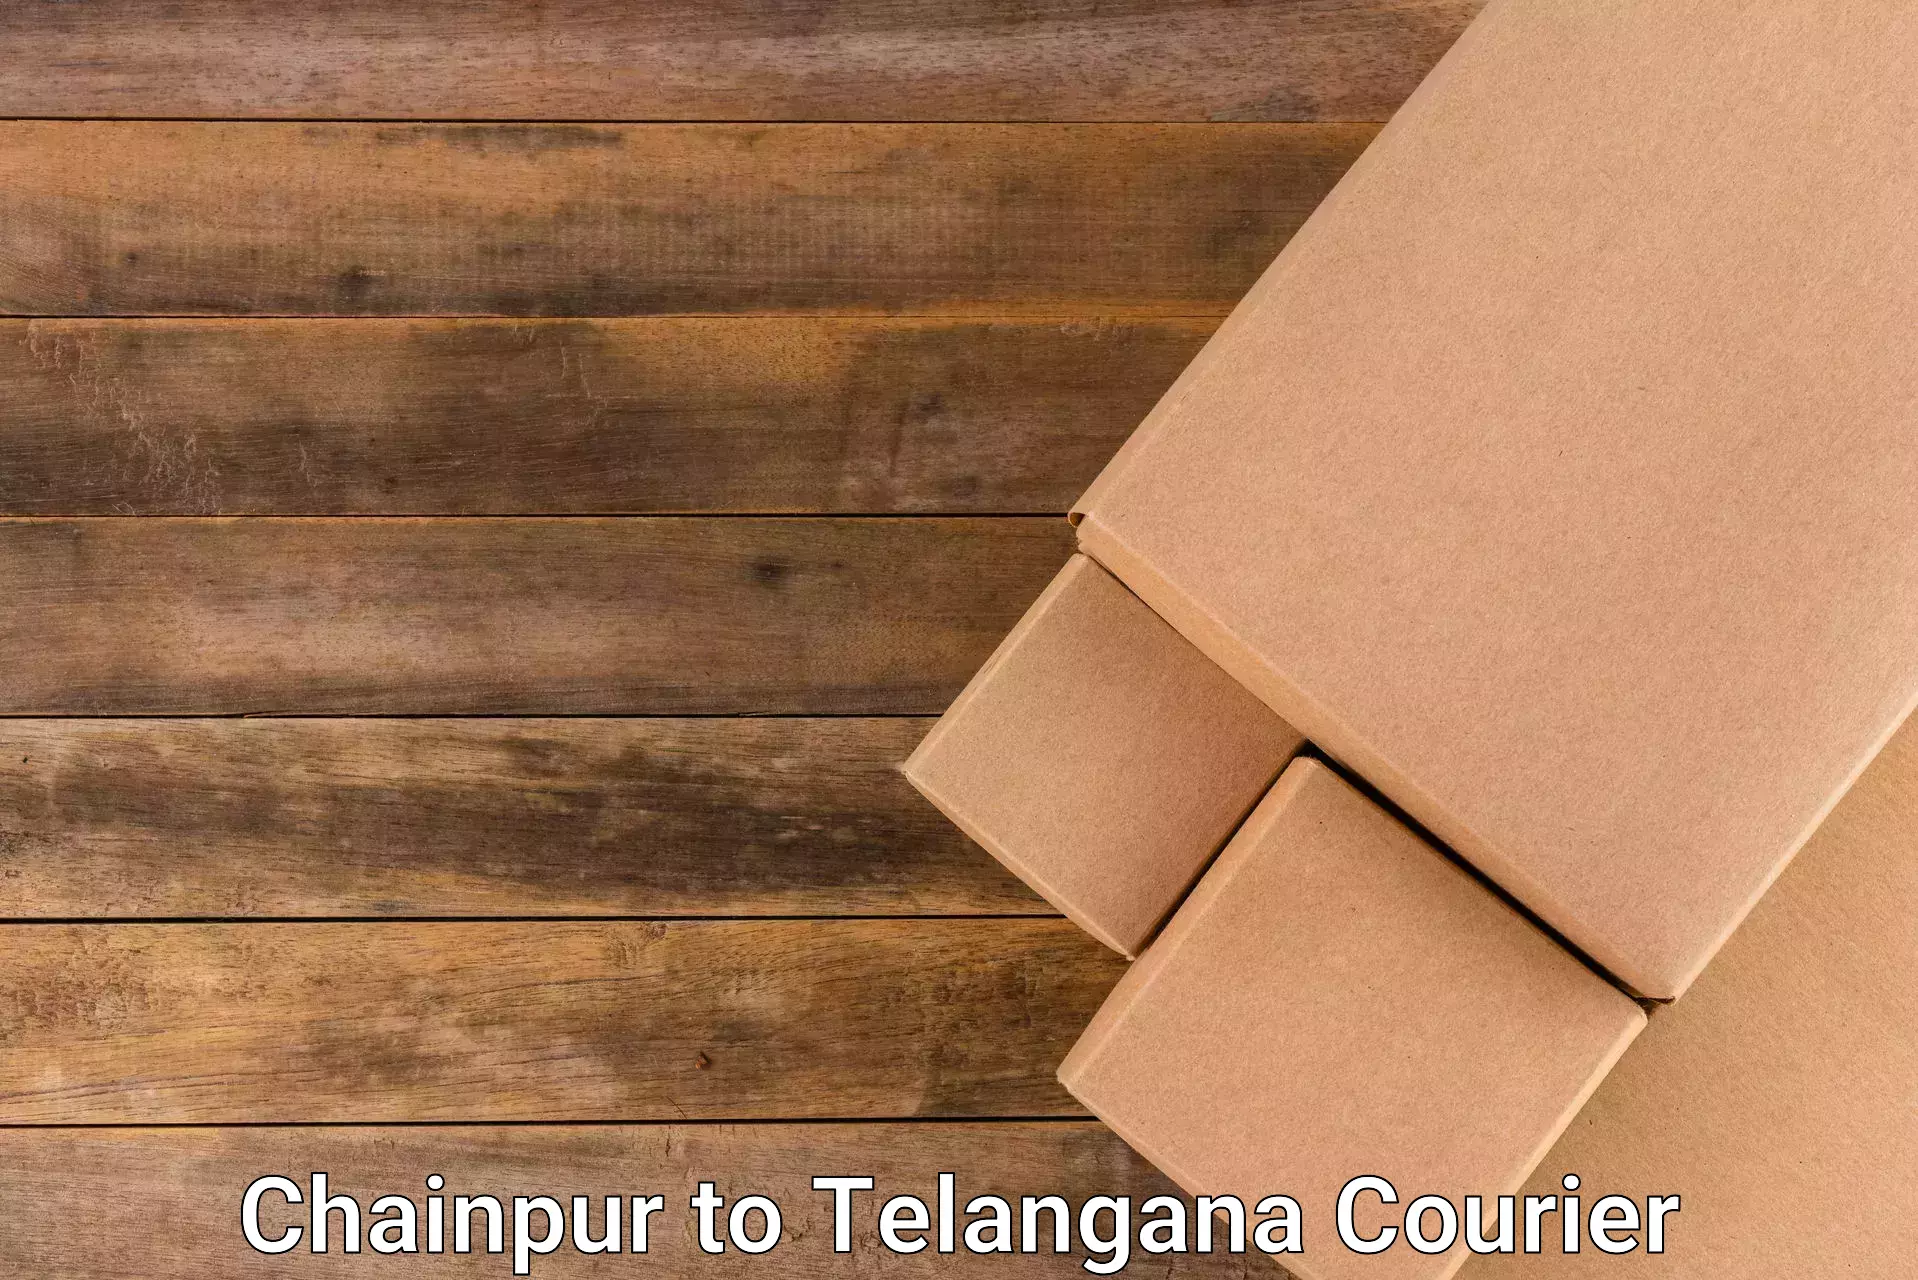 Overnight delivery services in Chainpur to Telangana